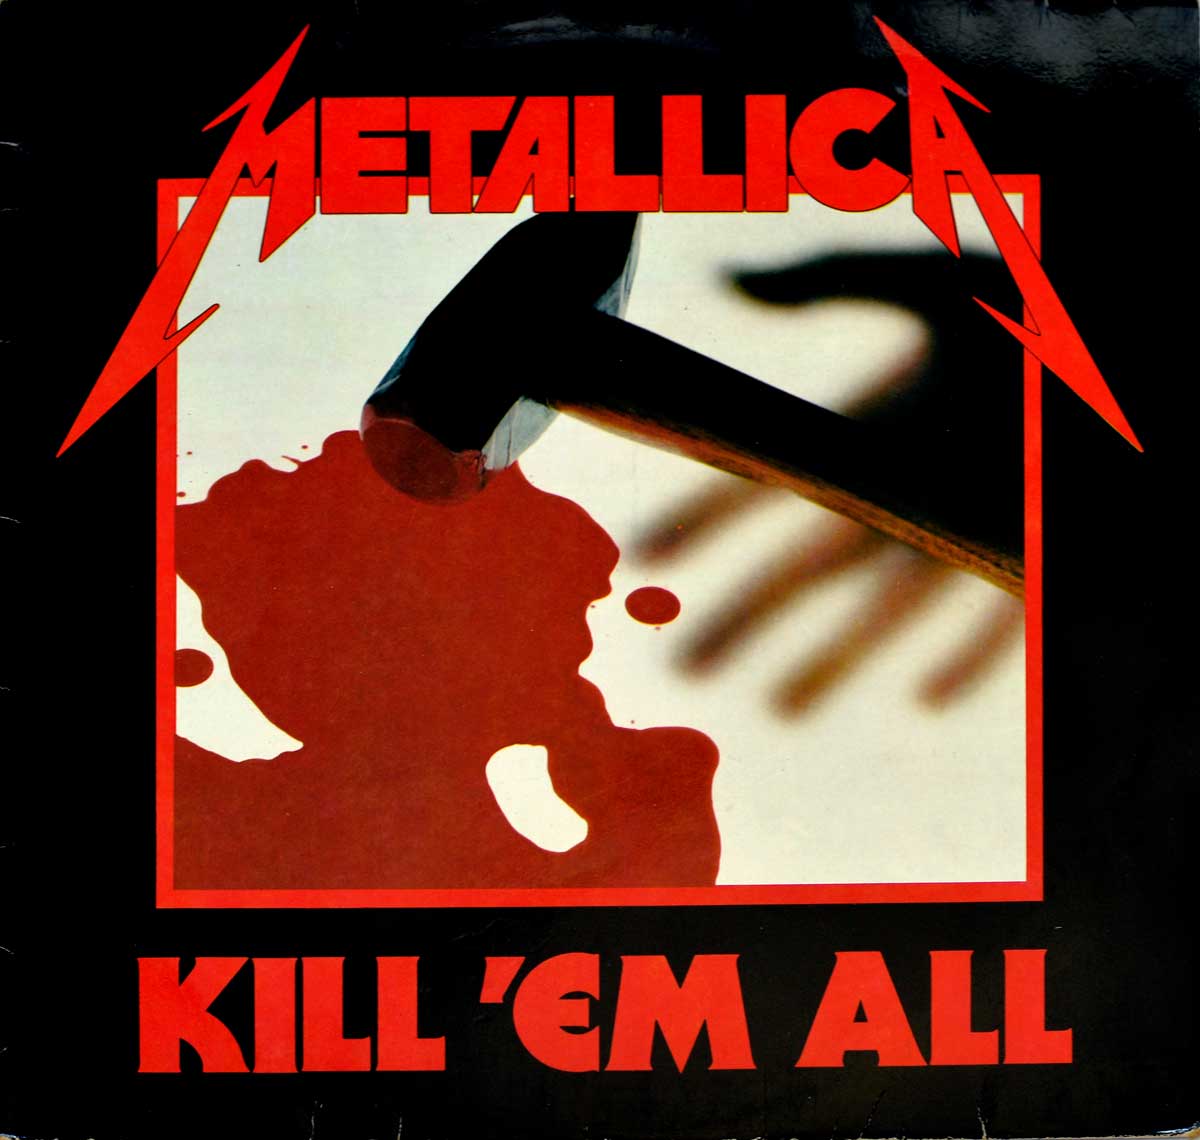 large album front cover photo of: METALLICA Kill 'em All 